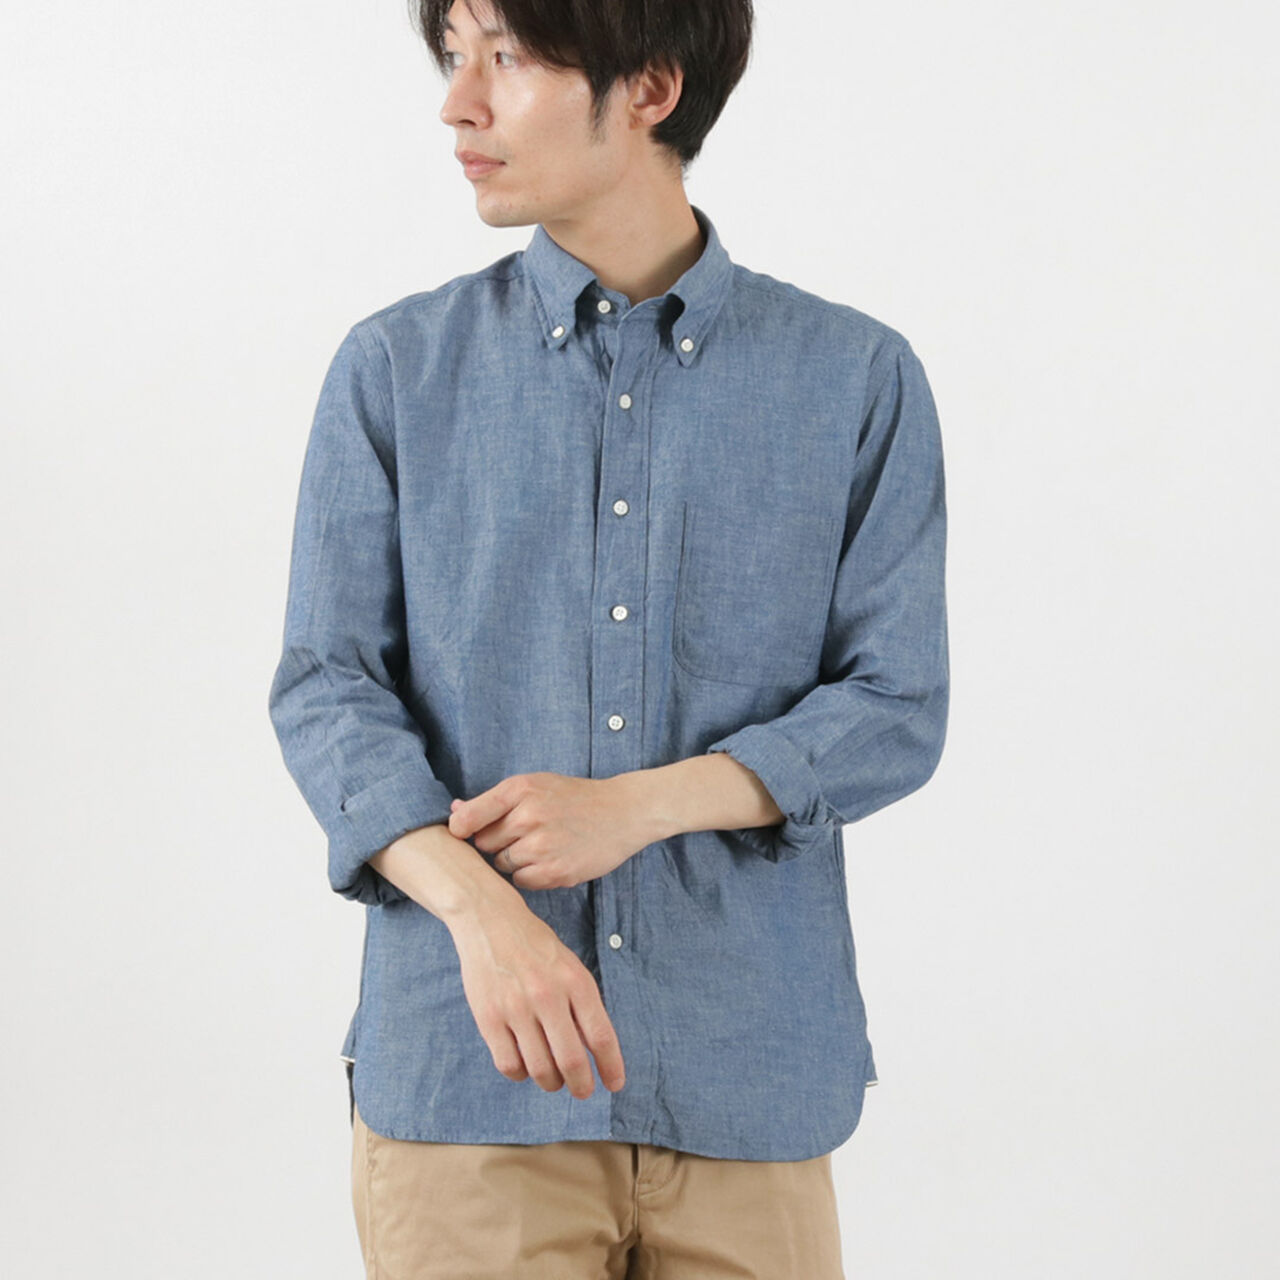 Selvage Chambray Button Down Shirt,Blue, large image number 0